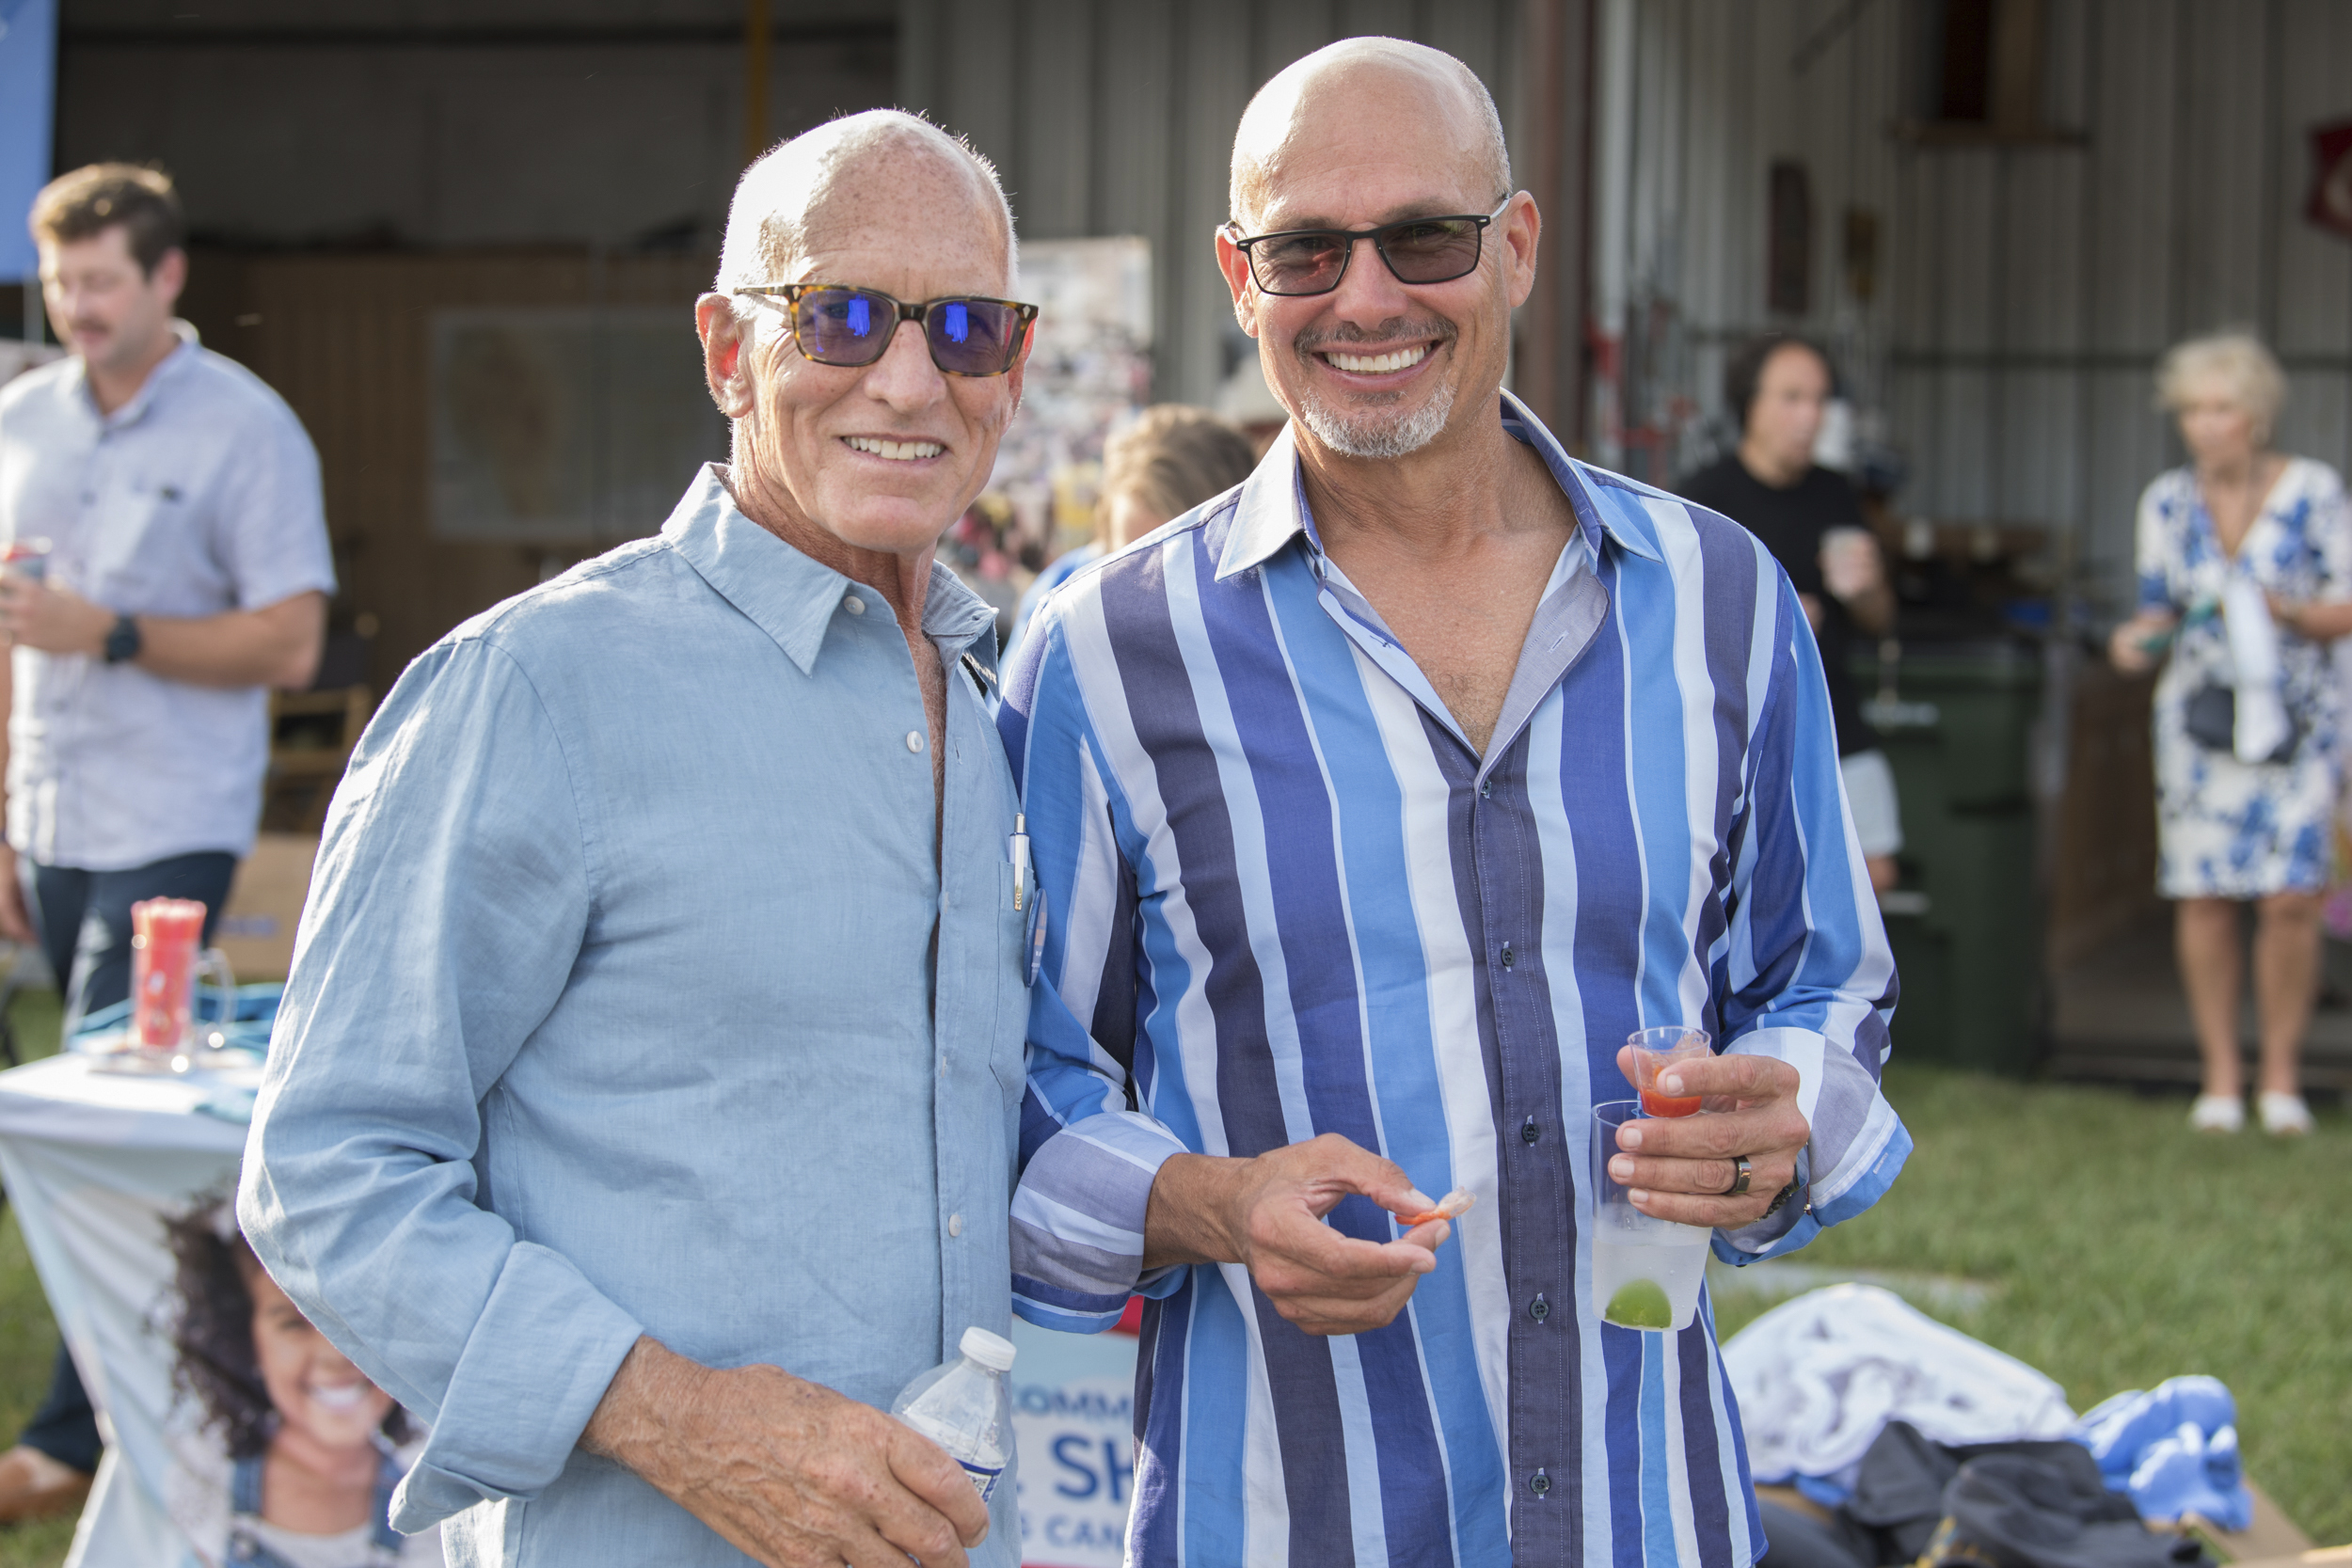 Jonathan Glynn and Kent Feuerring at the 4th Annual Hamptons Artists for Haiti Benefit Bash on August 7.          Joelle Wiggins